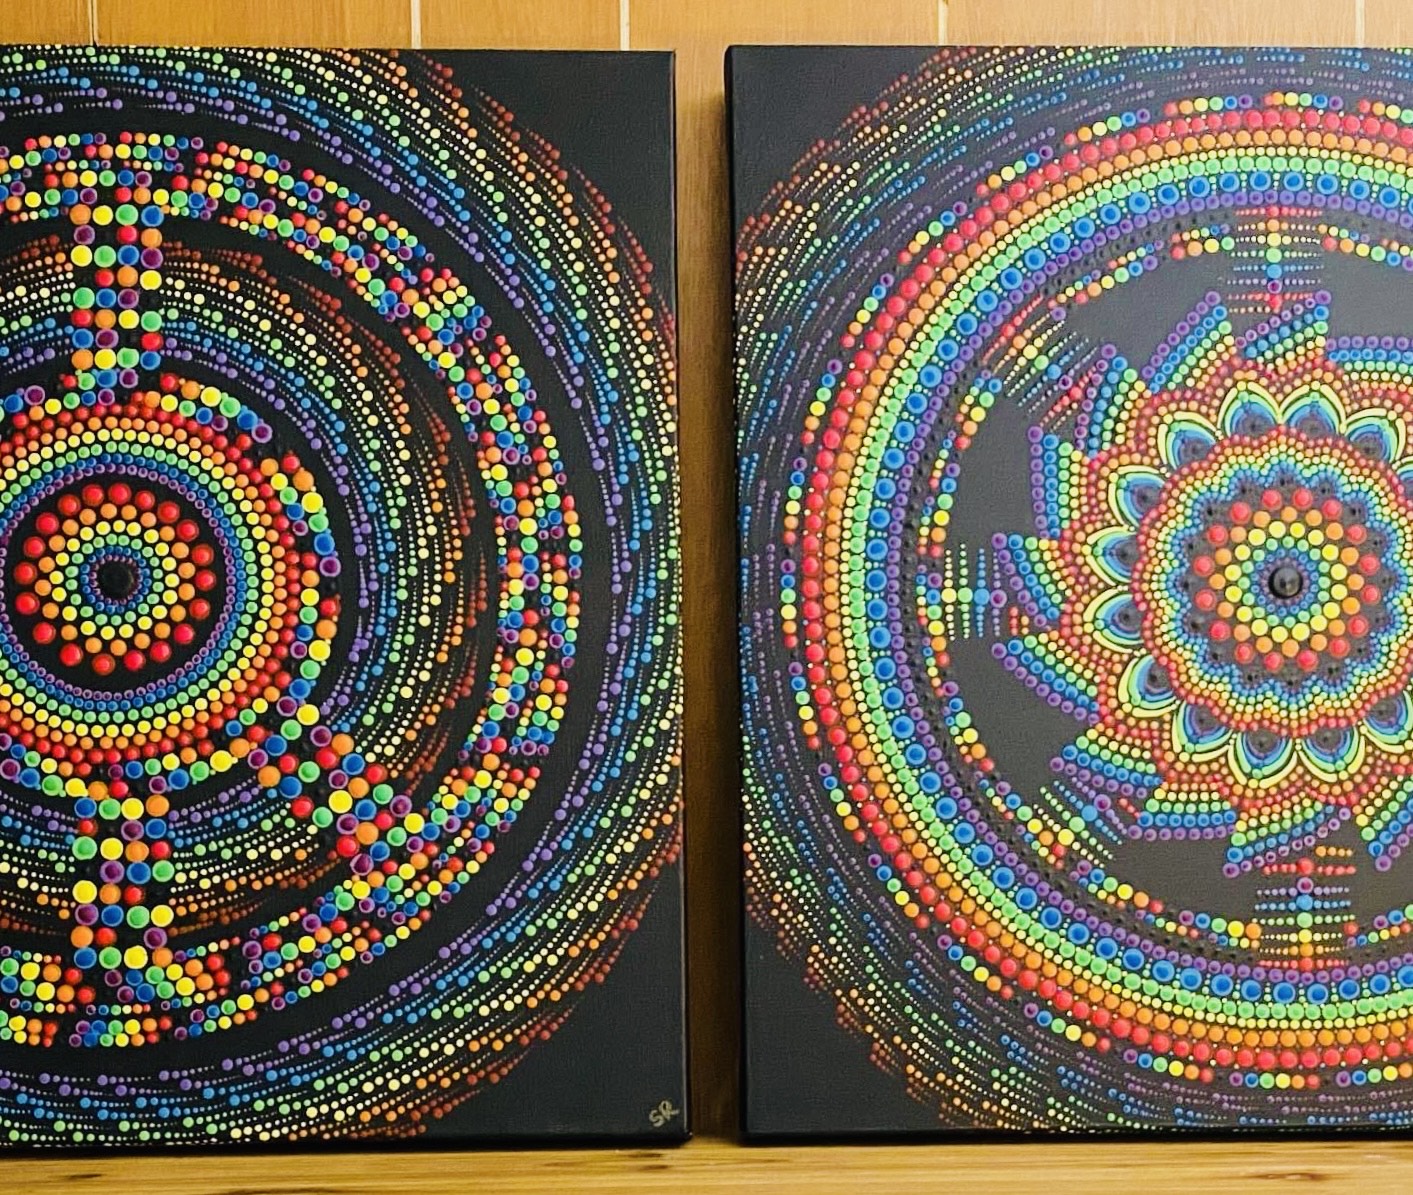 Two intricate paint mandalas, shown side by side on a wooden surface.